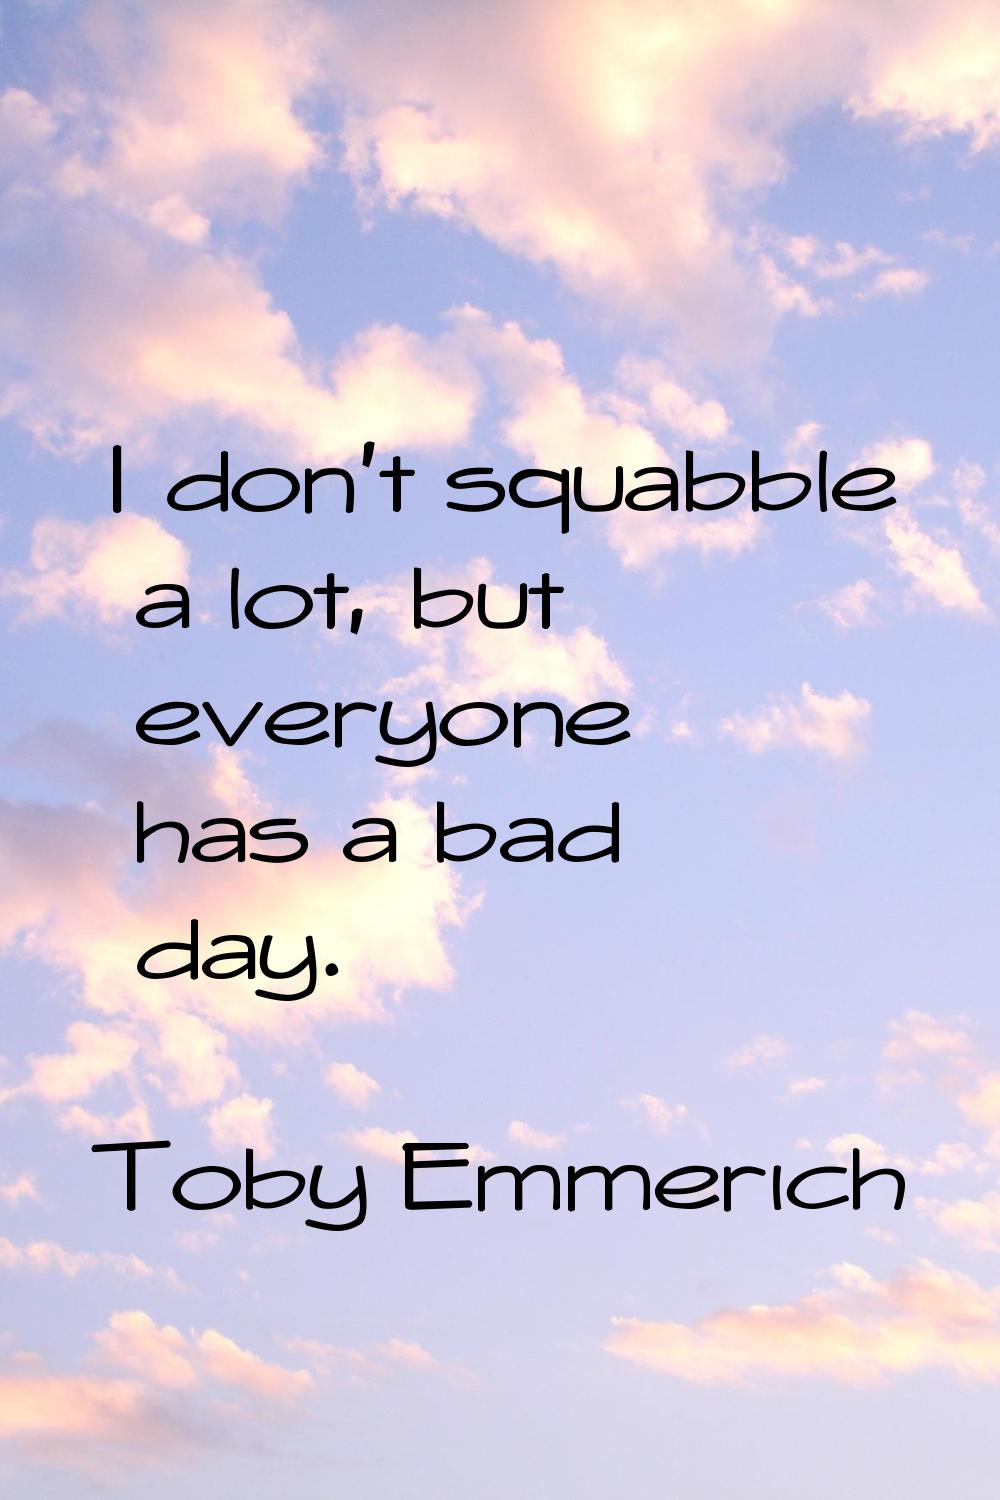 I don't squabble a lot, but everyone has a bad day.